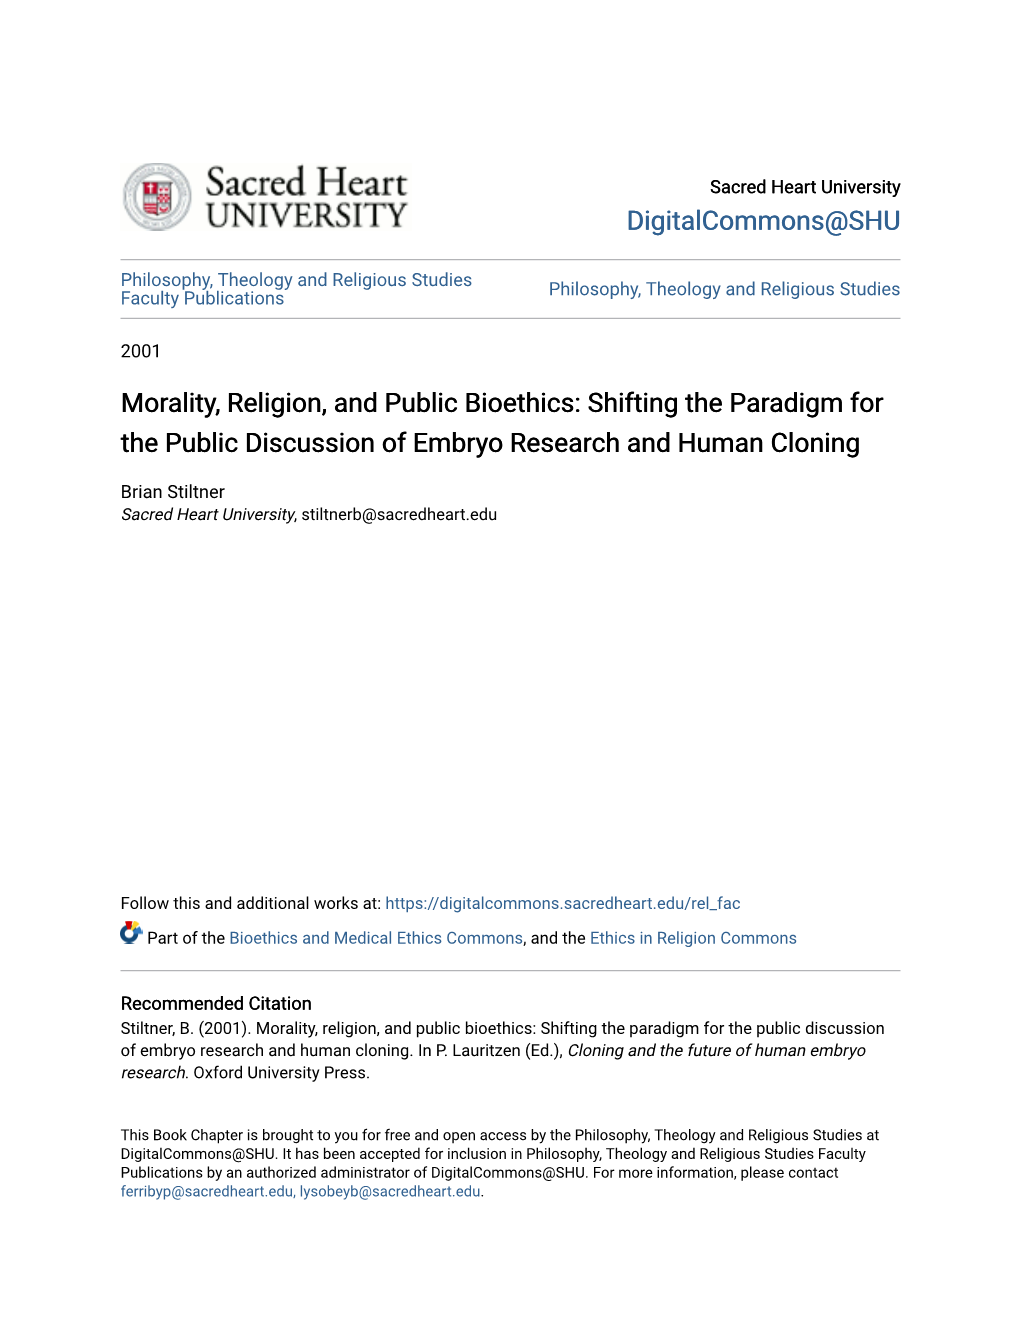 Morality, Religion, and Public Bioethics: Shifting the Paradigm for the Public Discussion of Embryo Research and Human Cloning